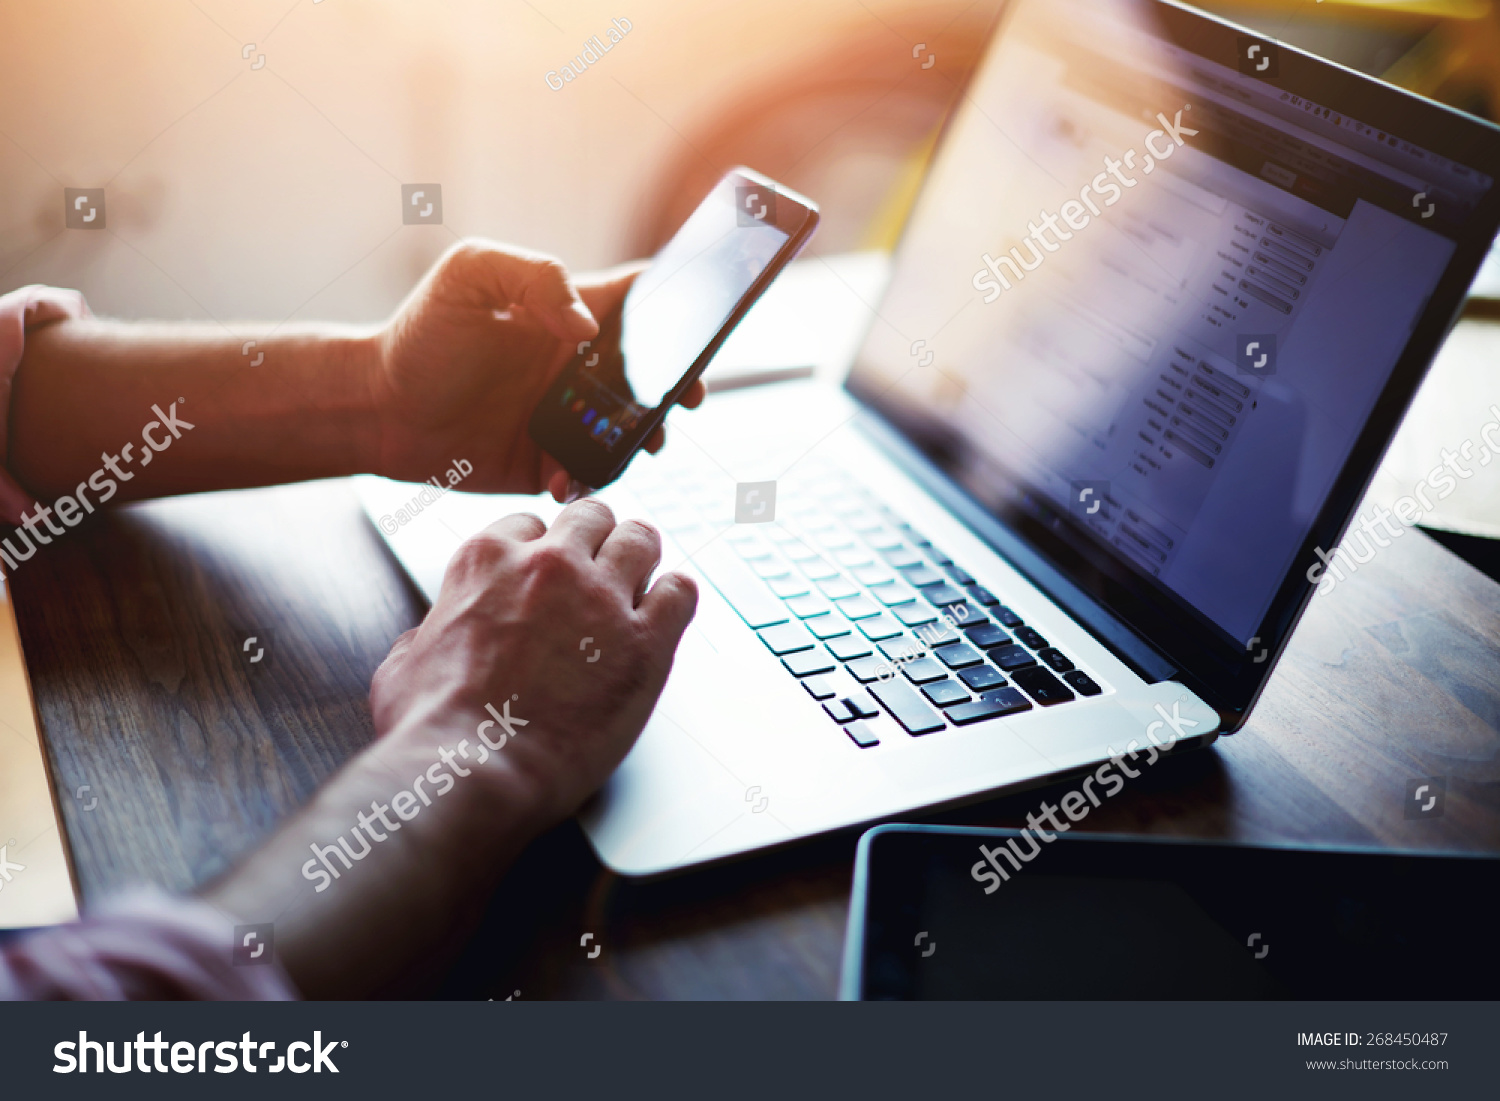 Side view shot of a man's hands using smart phone in interior, rear view of business man hands busy using cell phone at office desk, young male student typing on phone sitting at wooden table, flare #268450487